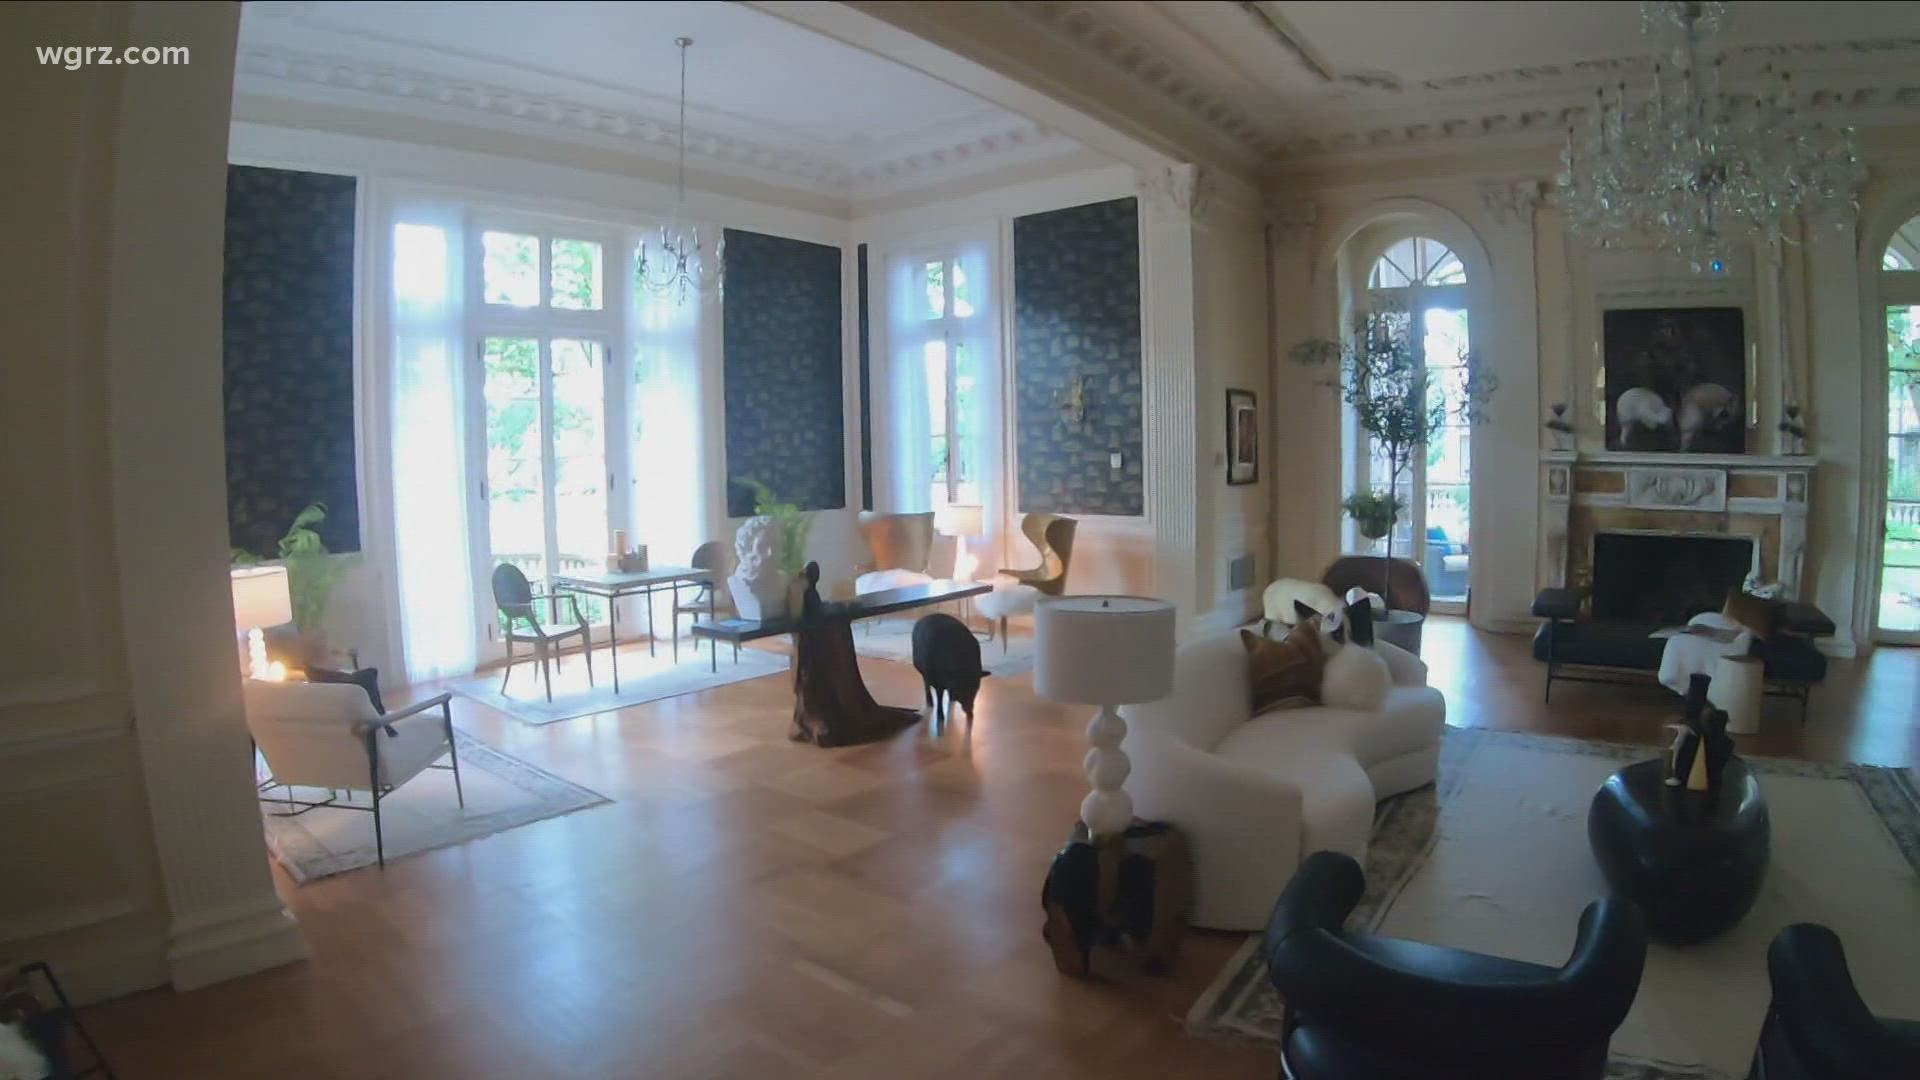 Decorator's Show House opens for tours in Buffalo